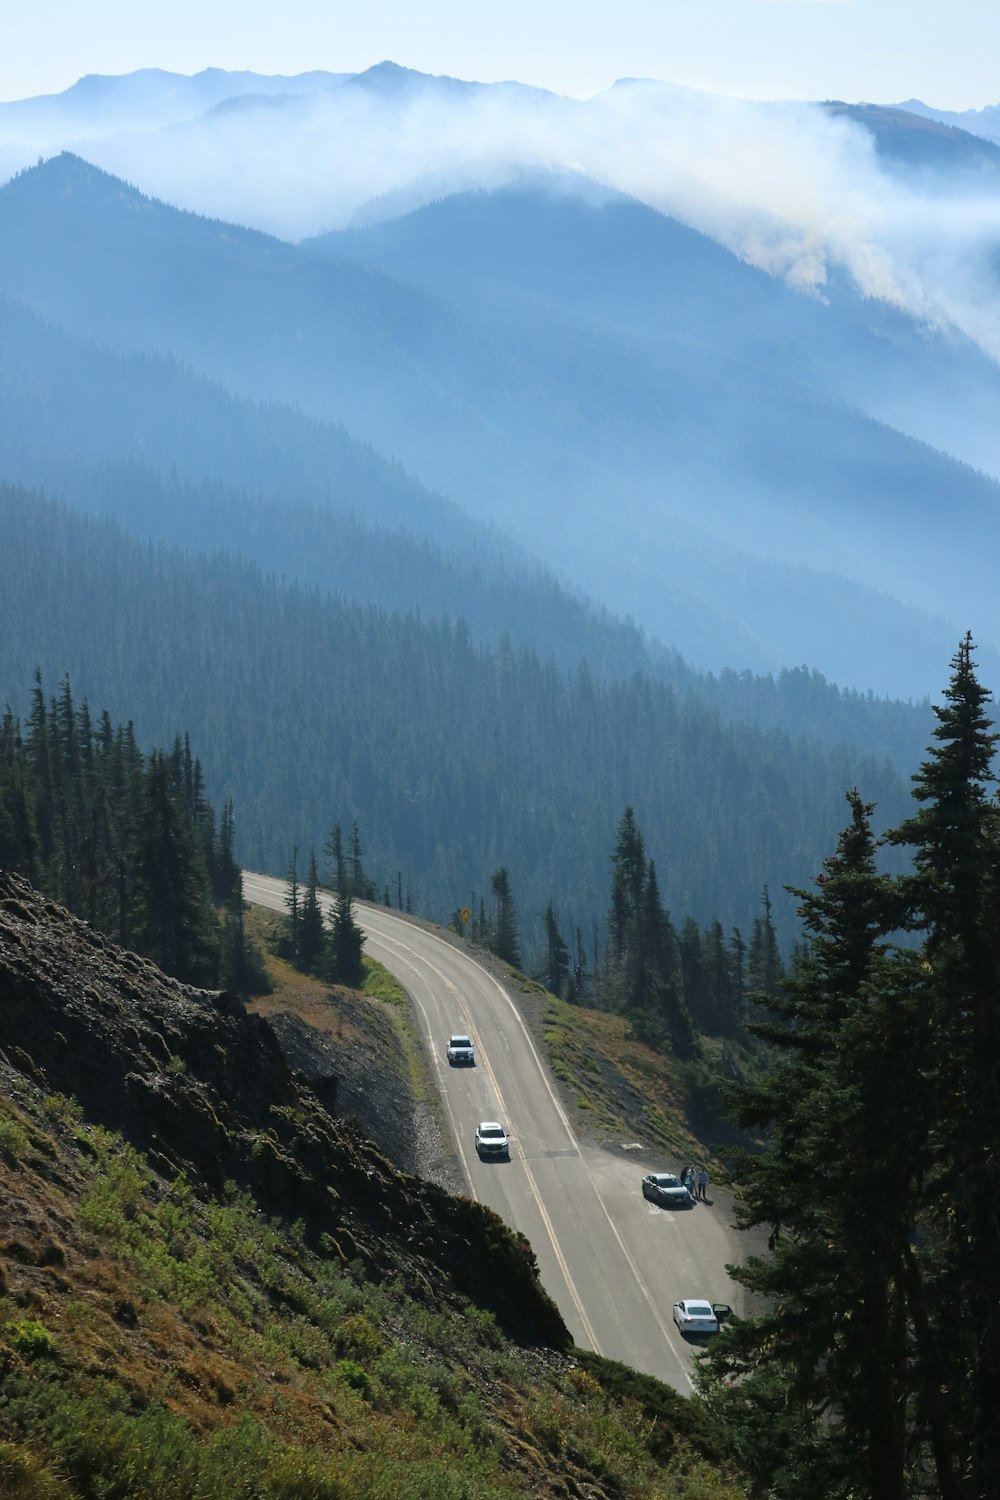 a view of a mountain road with cars driving on it